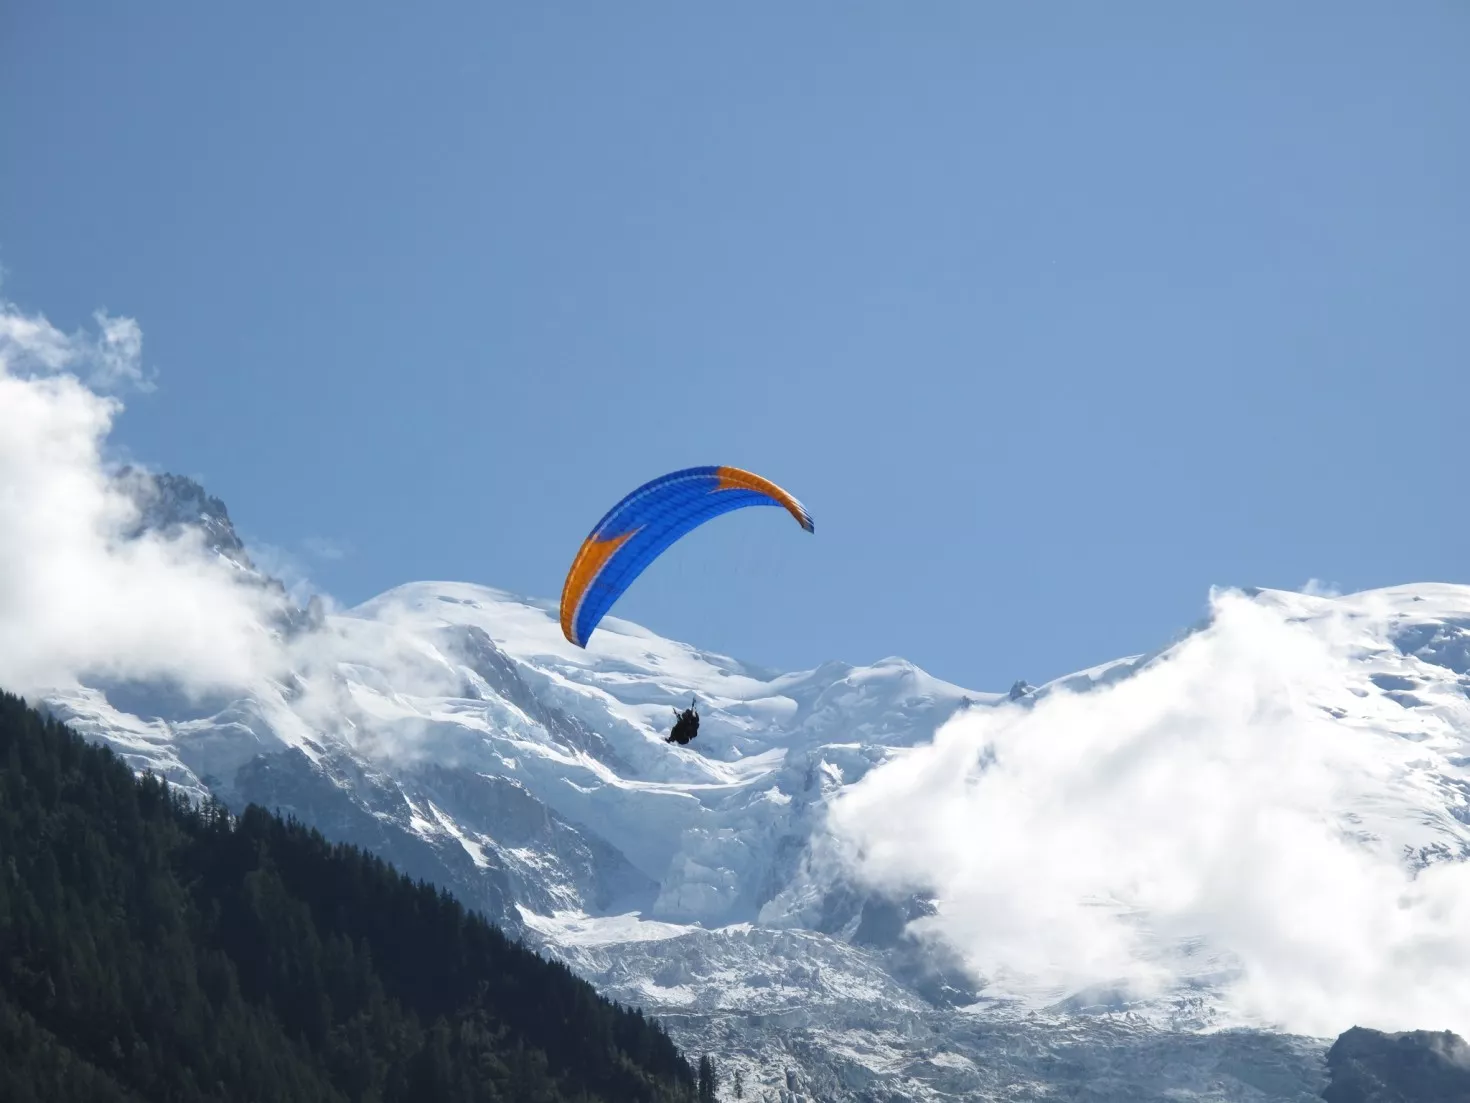 Fly Chamonix in France, Europe | Paragliding - Rated 1